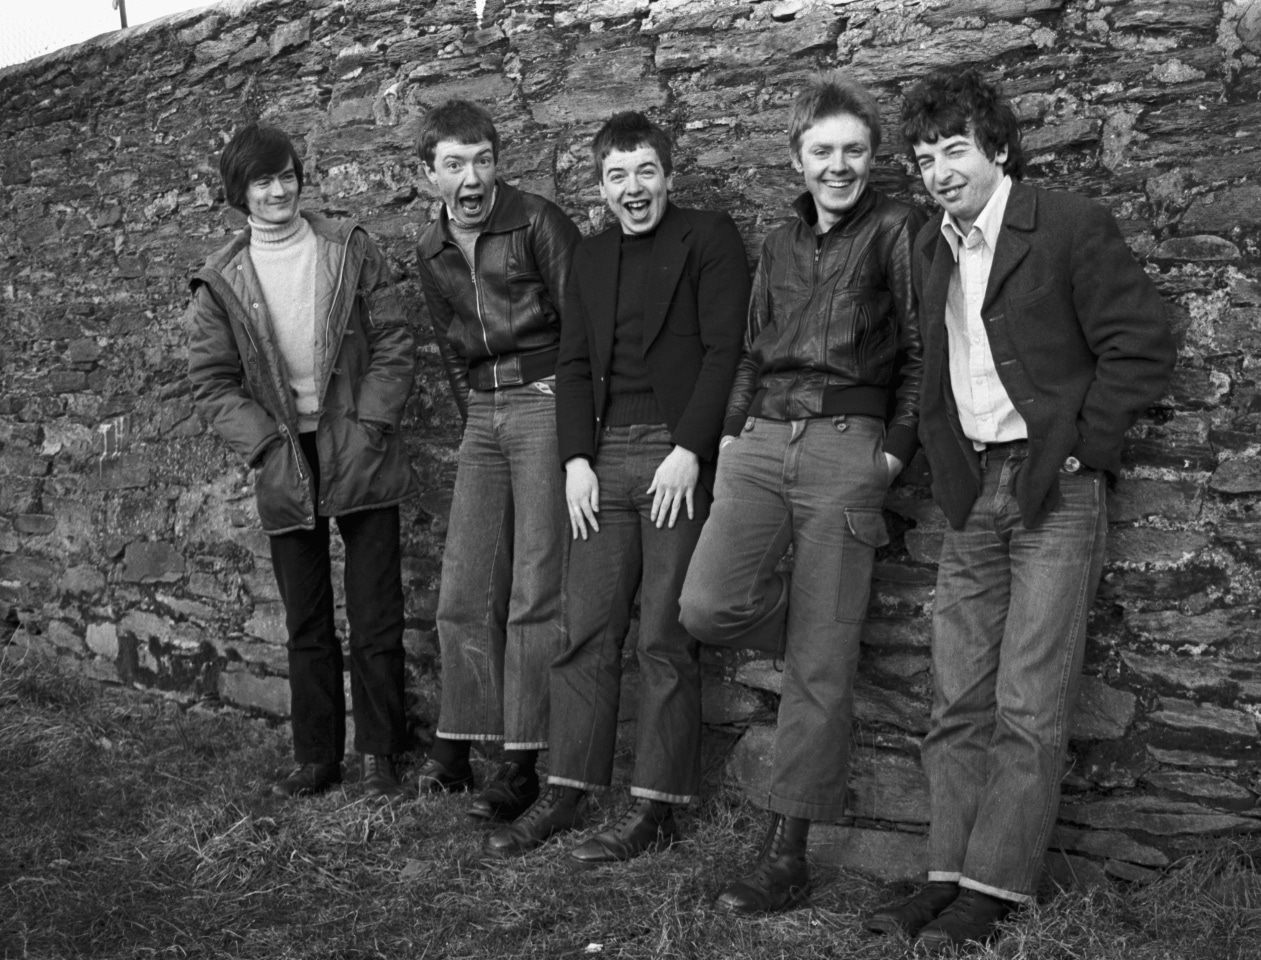 The Undertones: All Seven Inches of Them